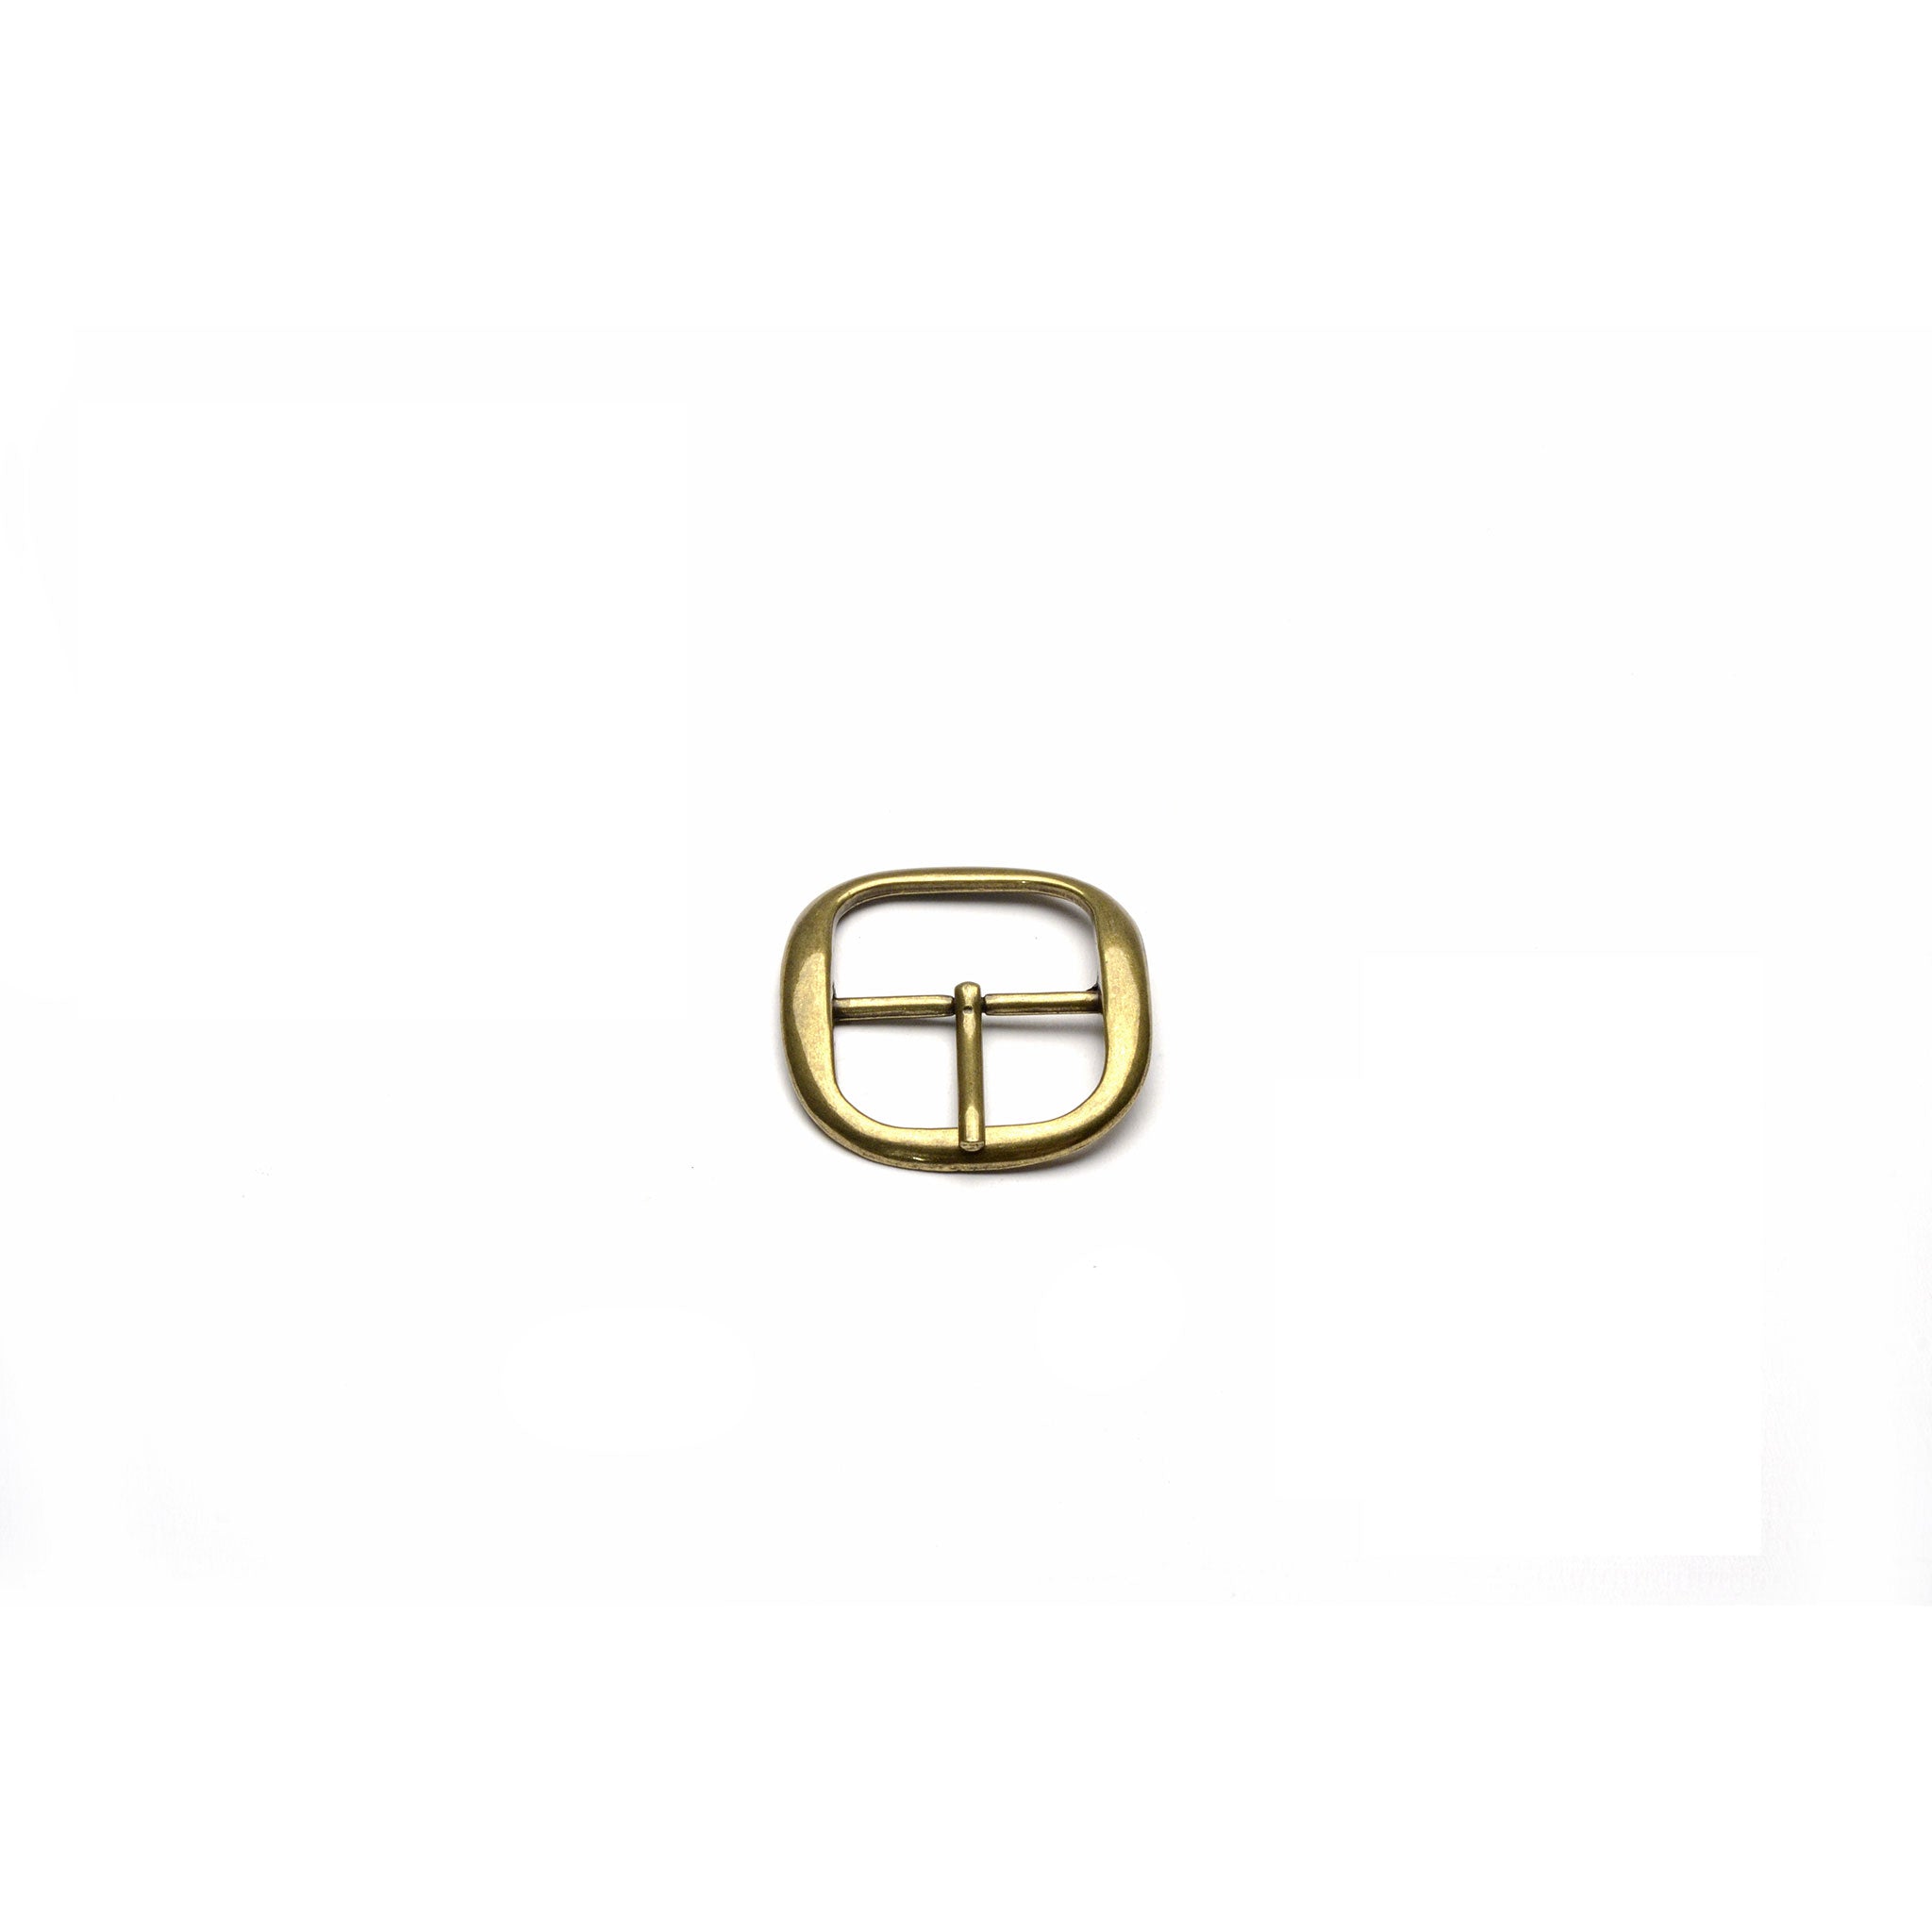 38mm Econo Centre Bar Buckle - Antique Brass  Finish from Identity Leathercraft